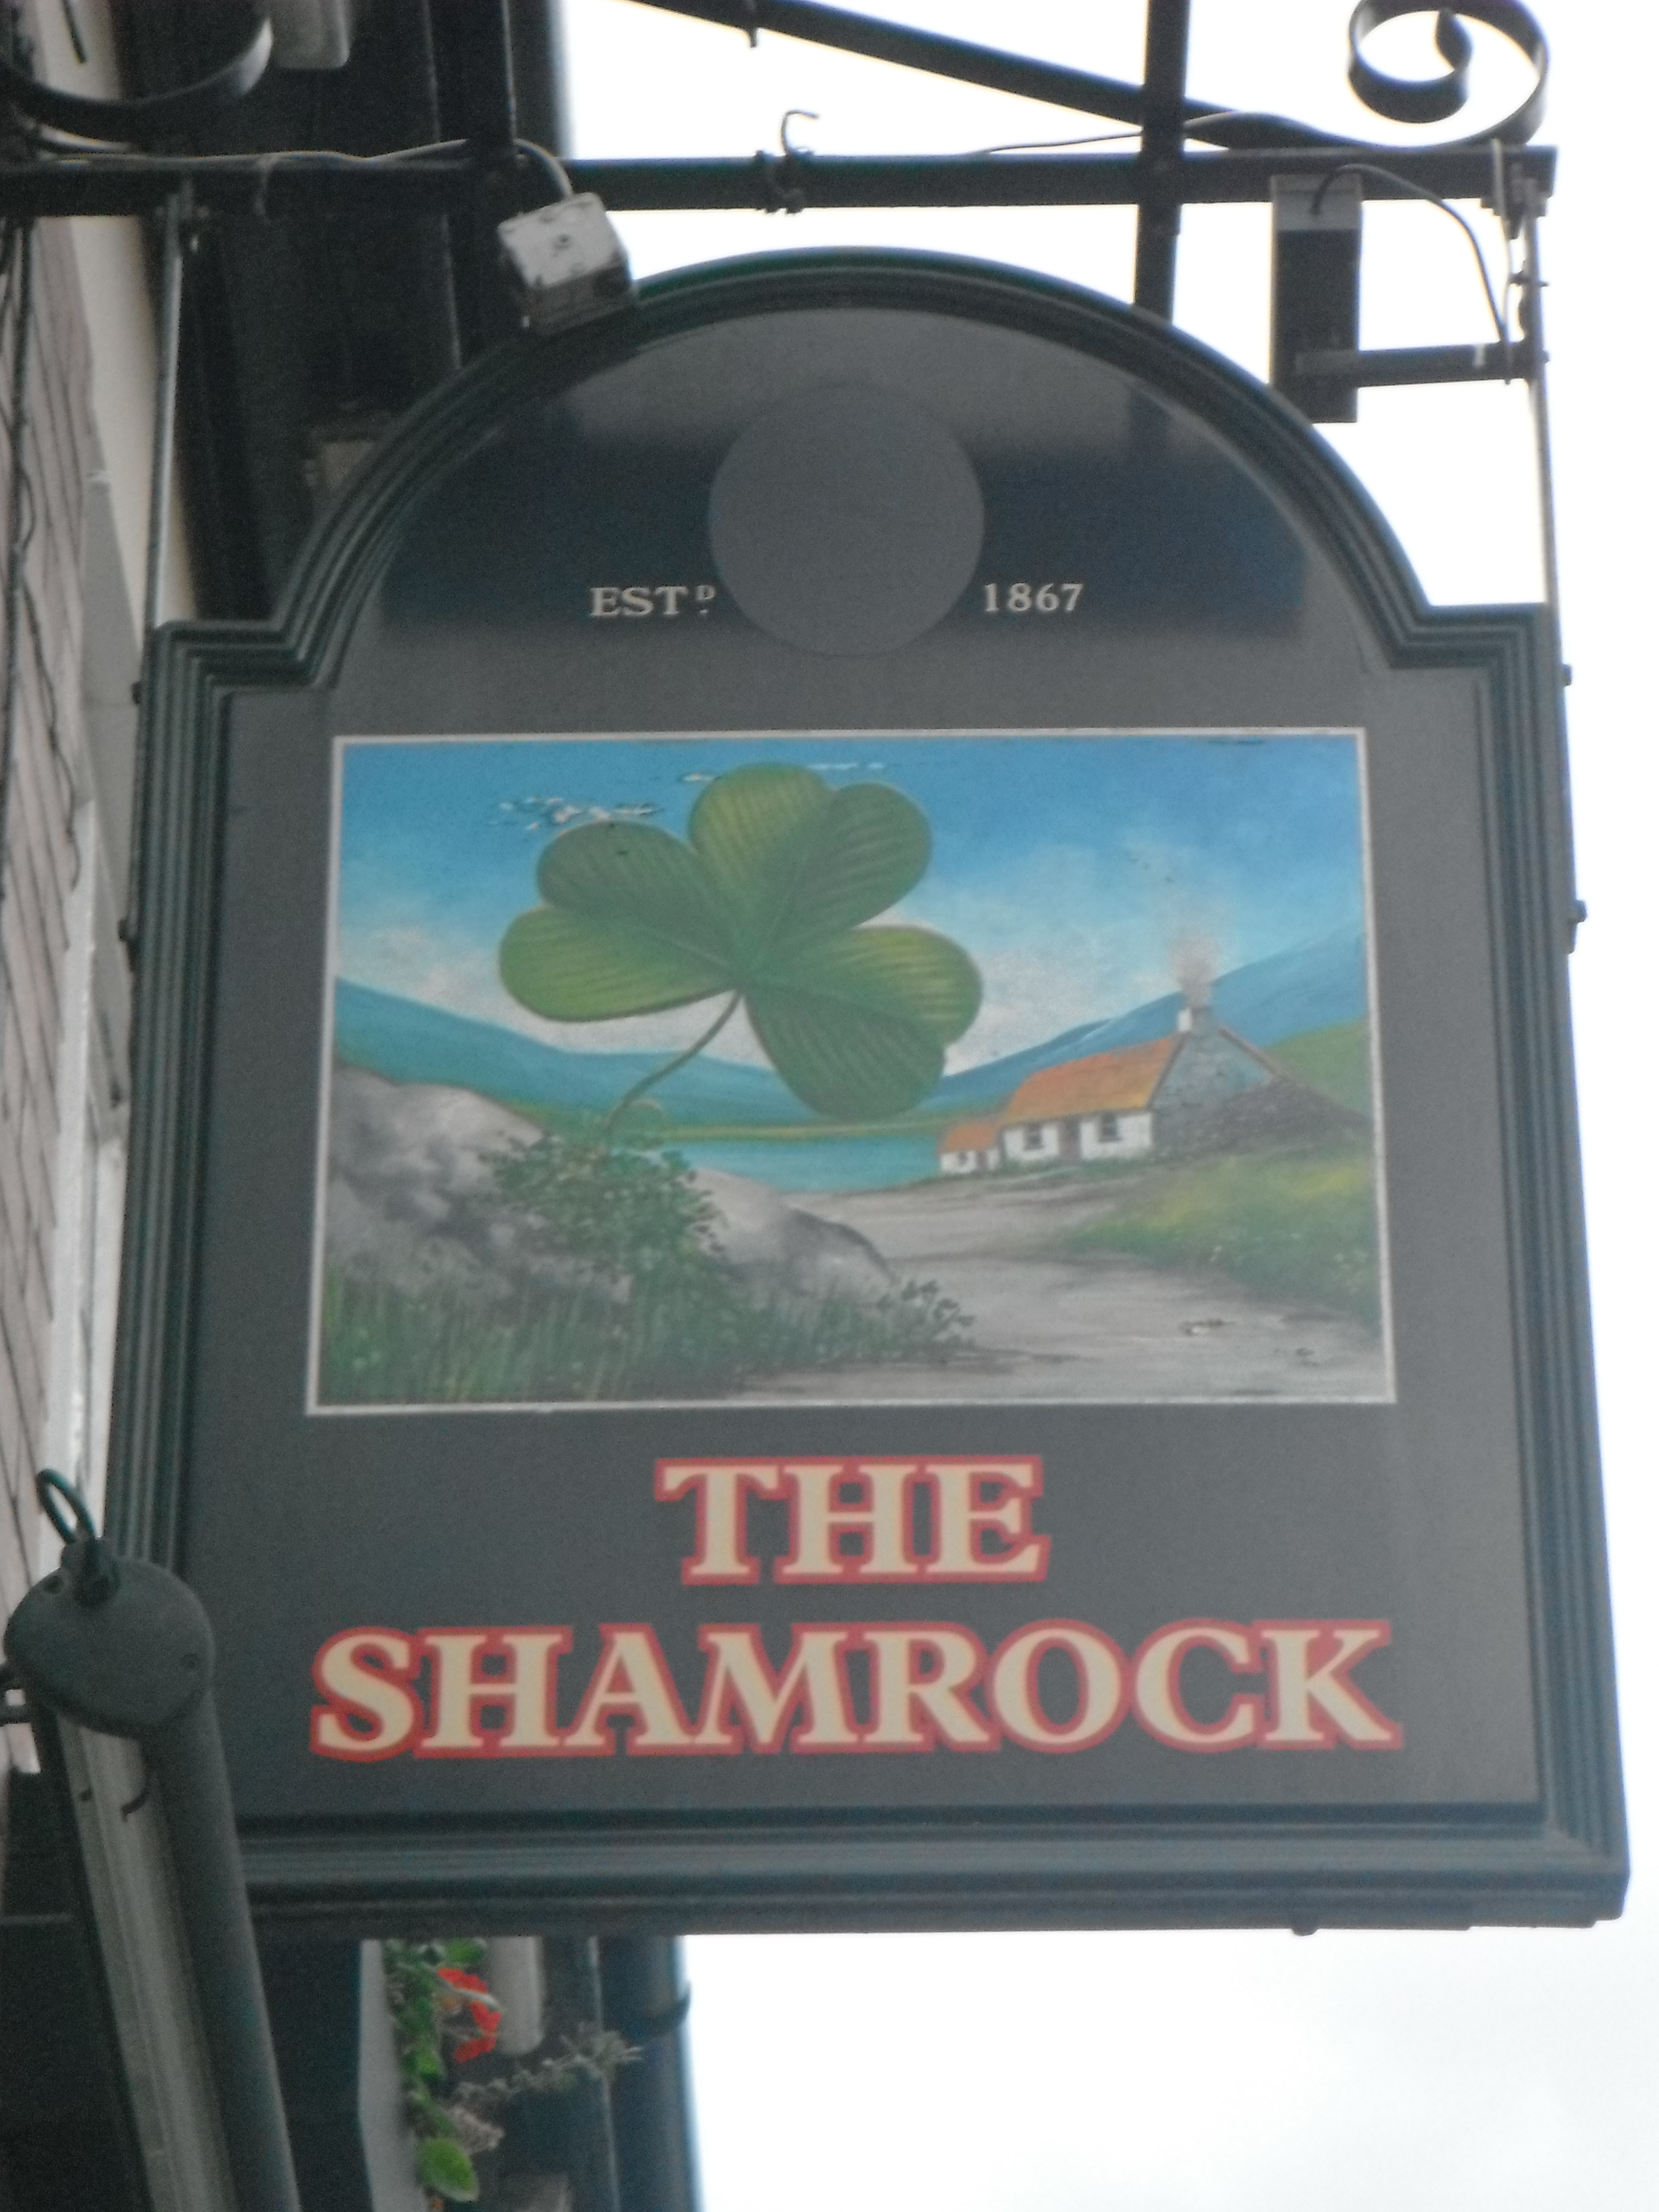 Photo taken by me – The Shamrock pub sign, Ancoats, Manchester 